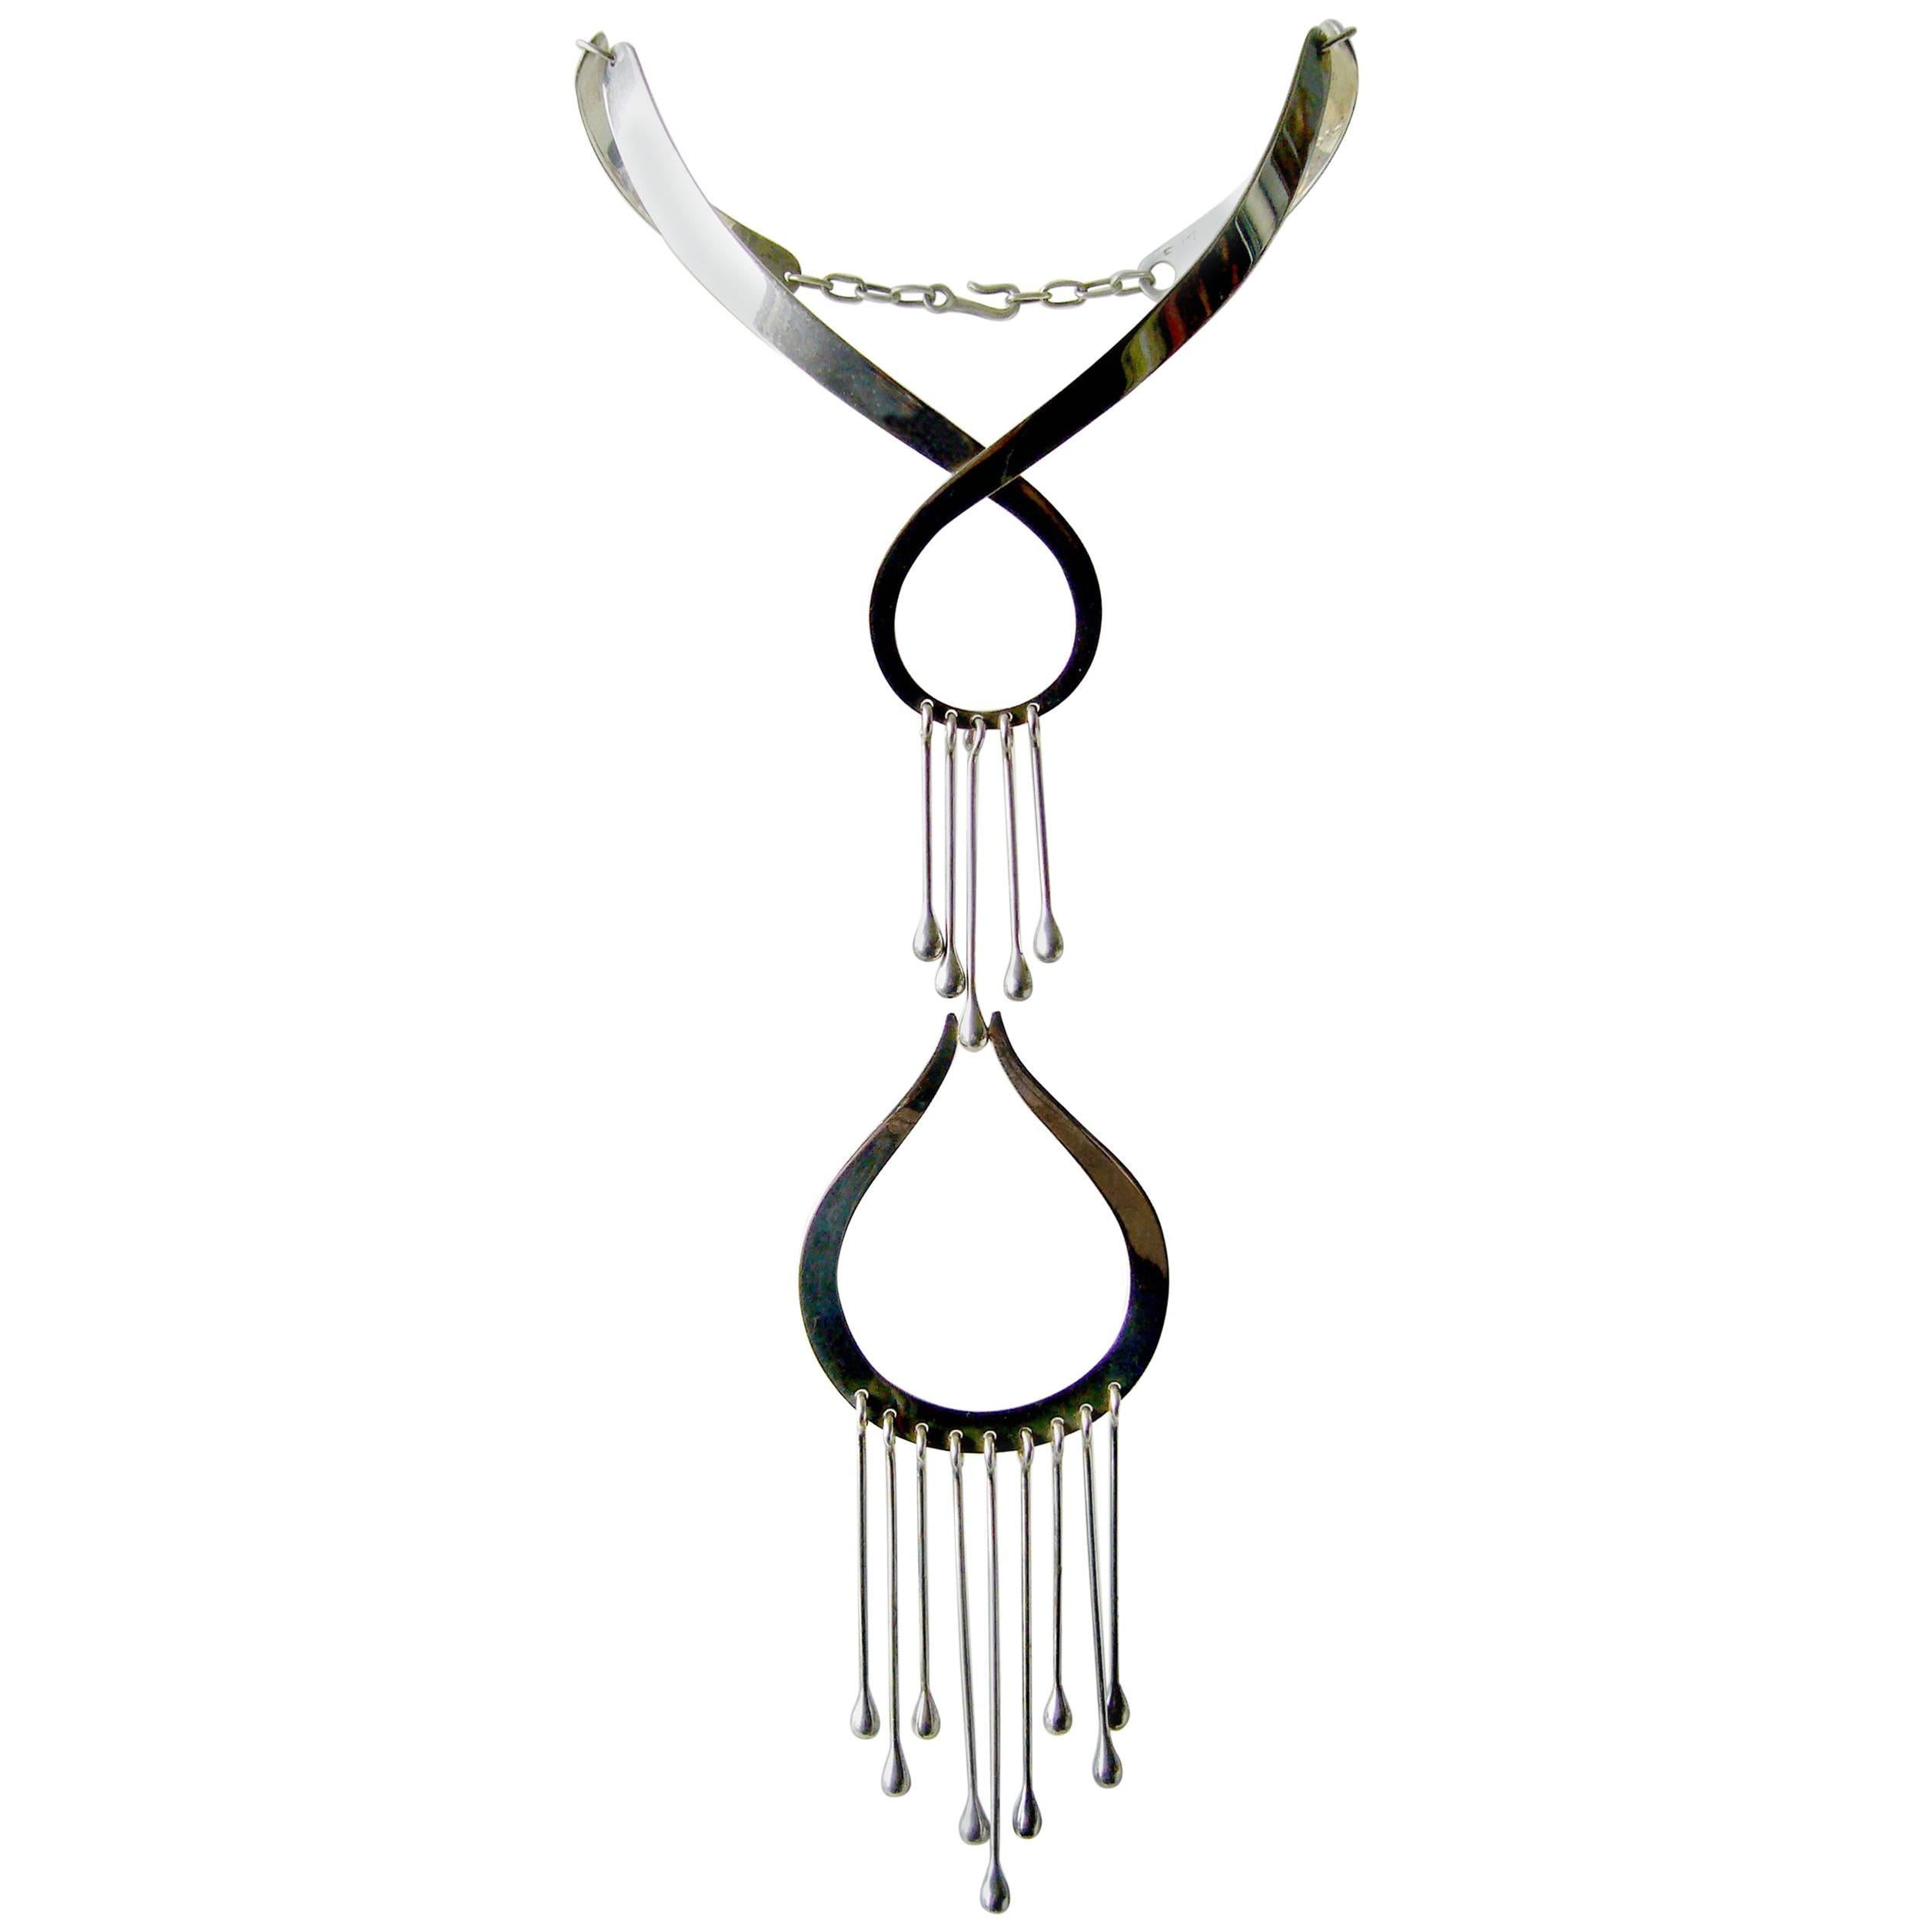 José Maria Puig Doria Sterling Silver Fringed Statement Necklace